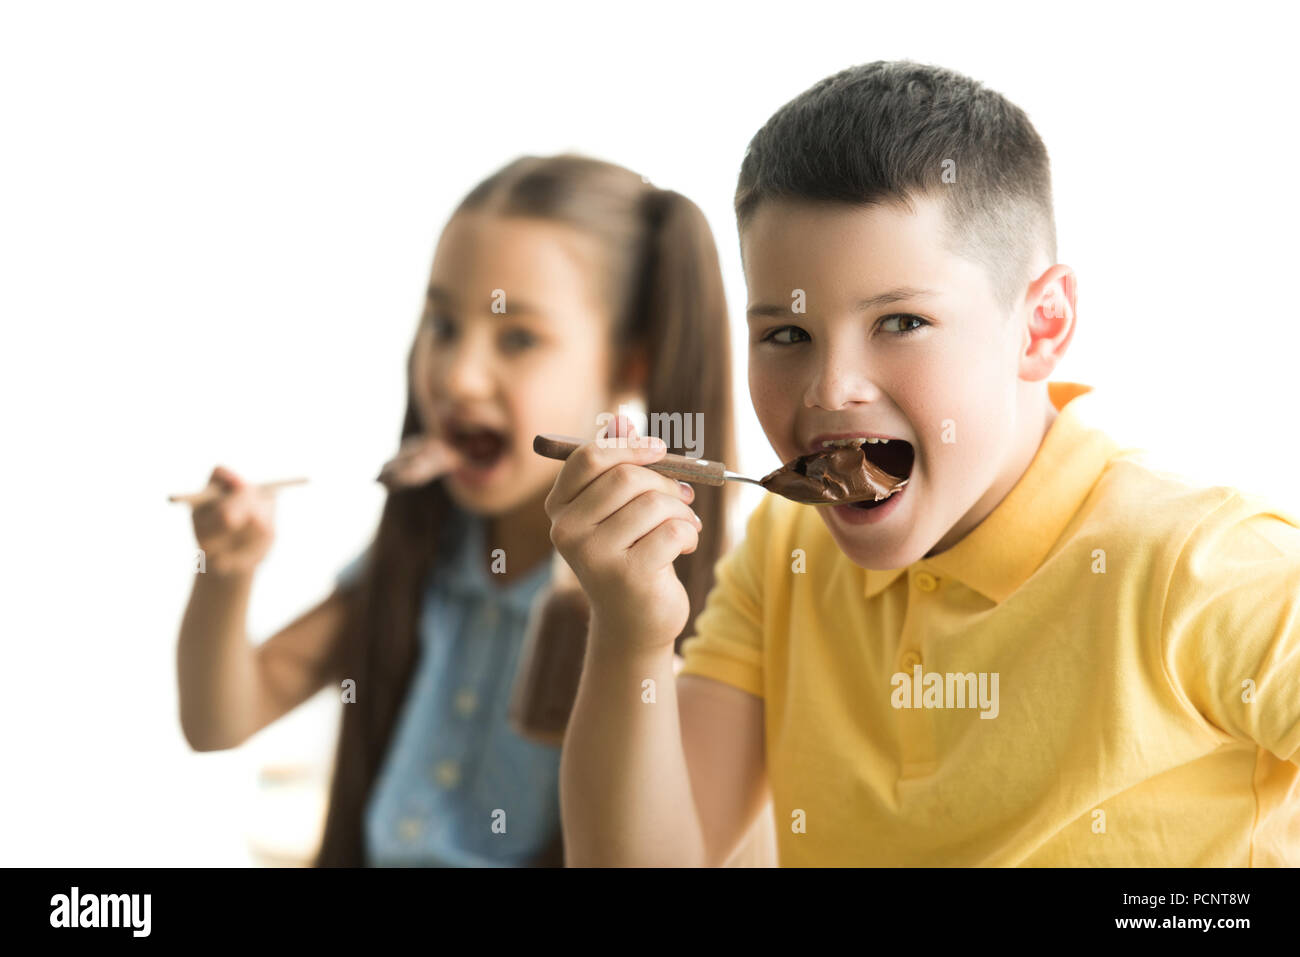 sister and brother eating chocolate in kitchen Stock Photo